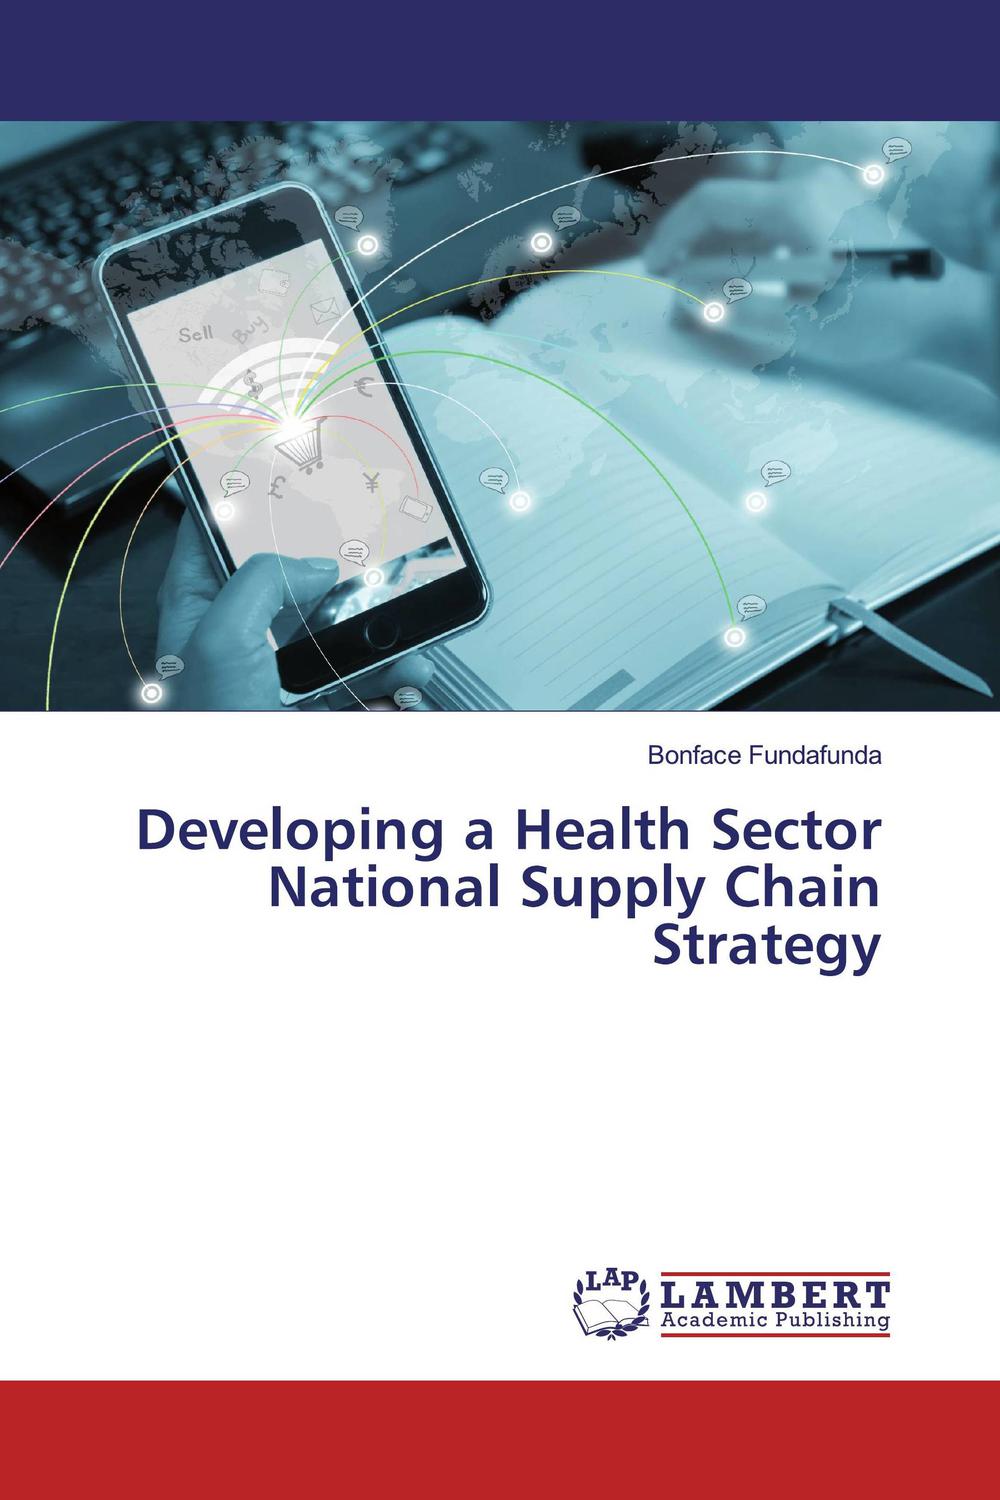 developing a health sector national supply chain strategy 1st edition bonface fundafunda 6200216371,